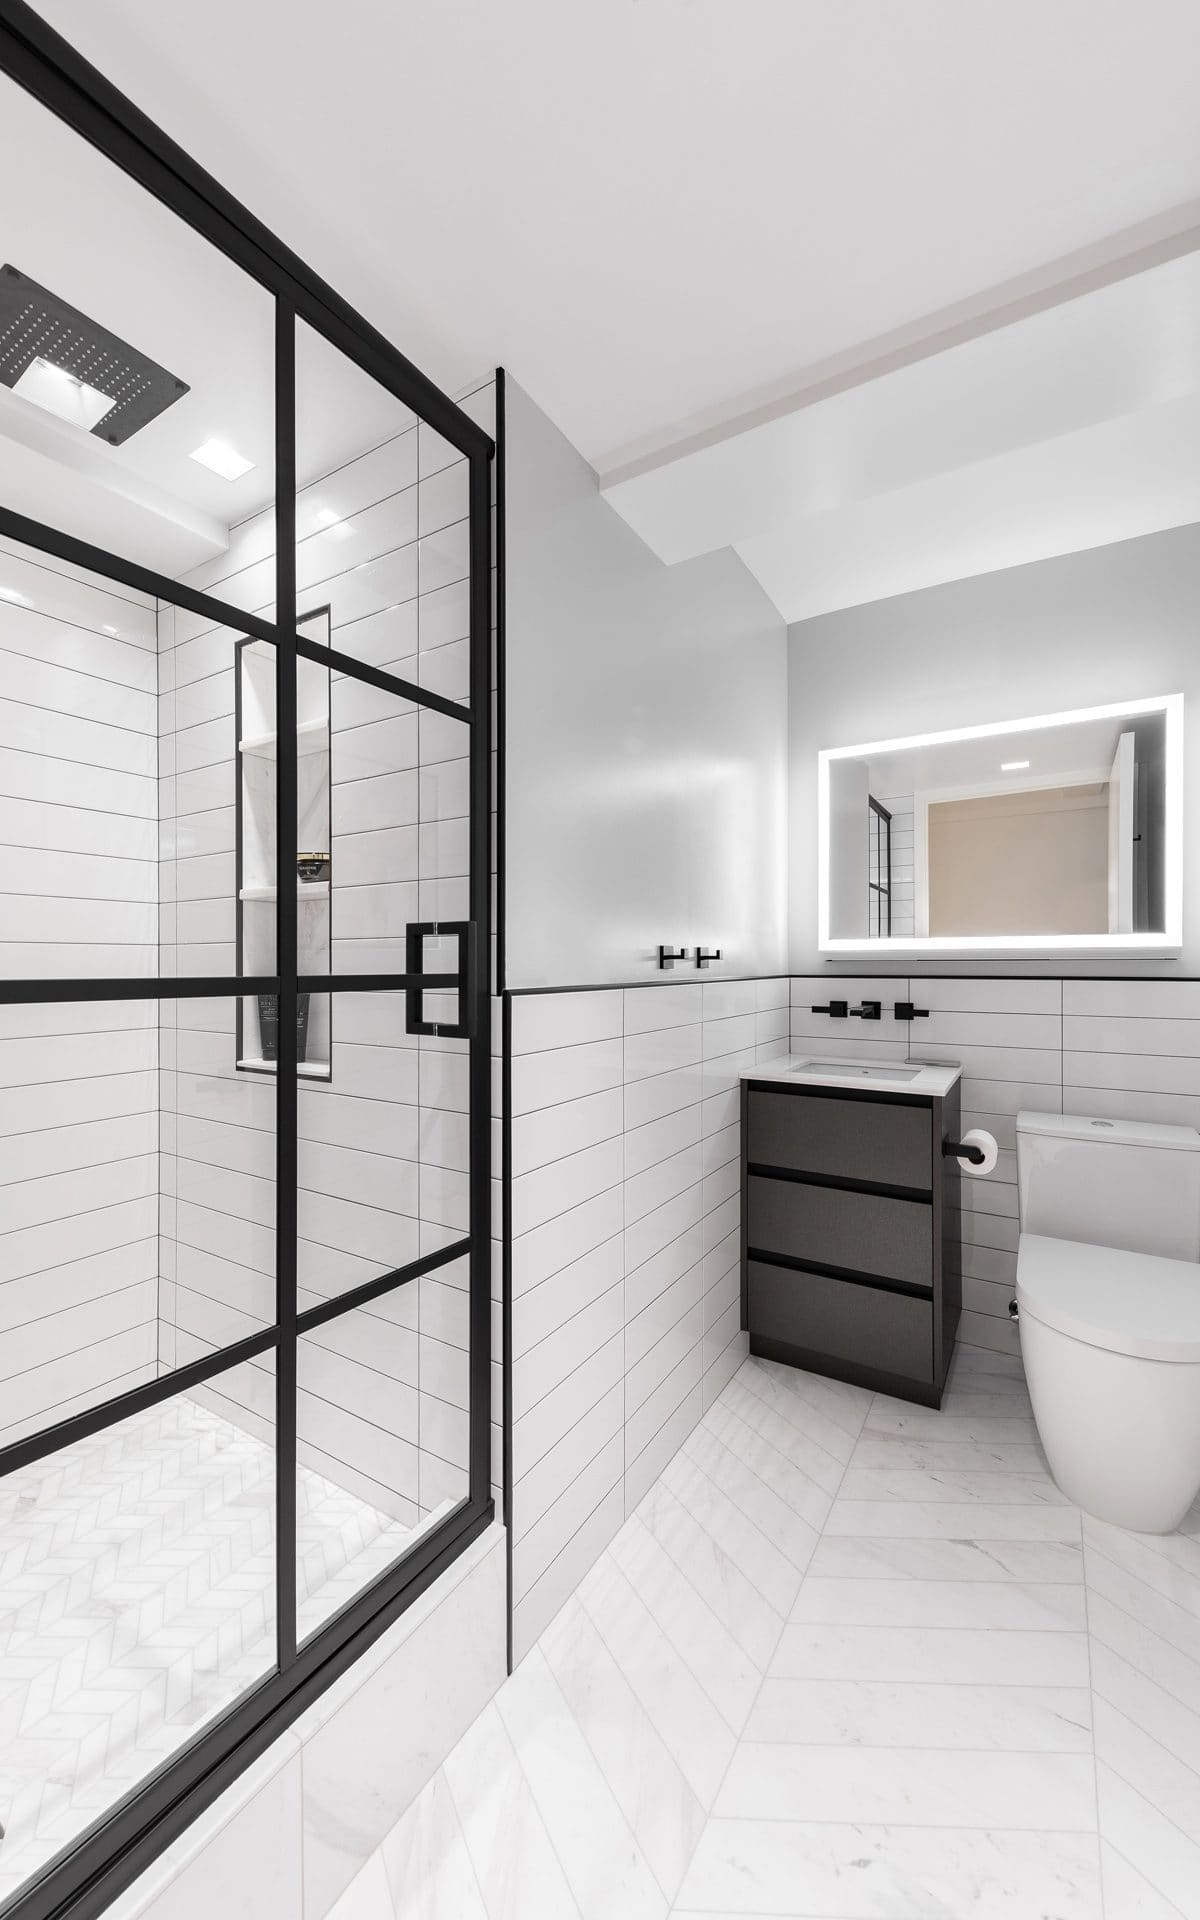 Ultra-modern bathroom features black-paned shower, white floor and backsplash tiles, and white modern accents.